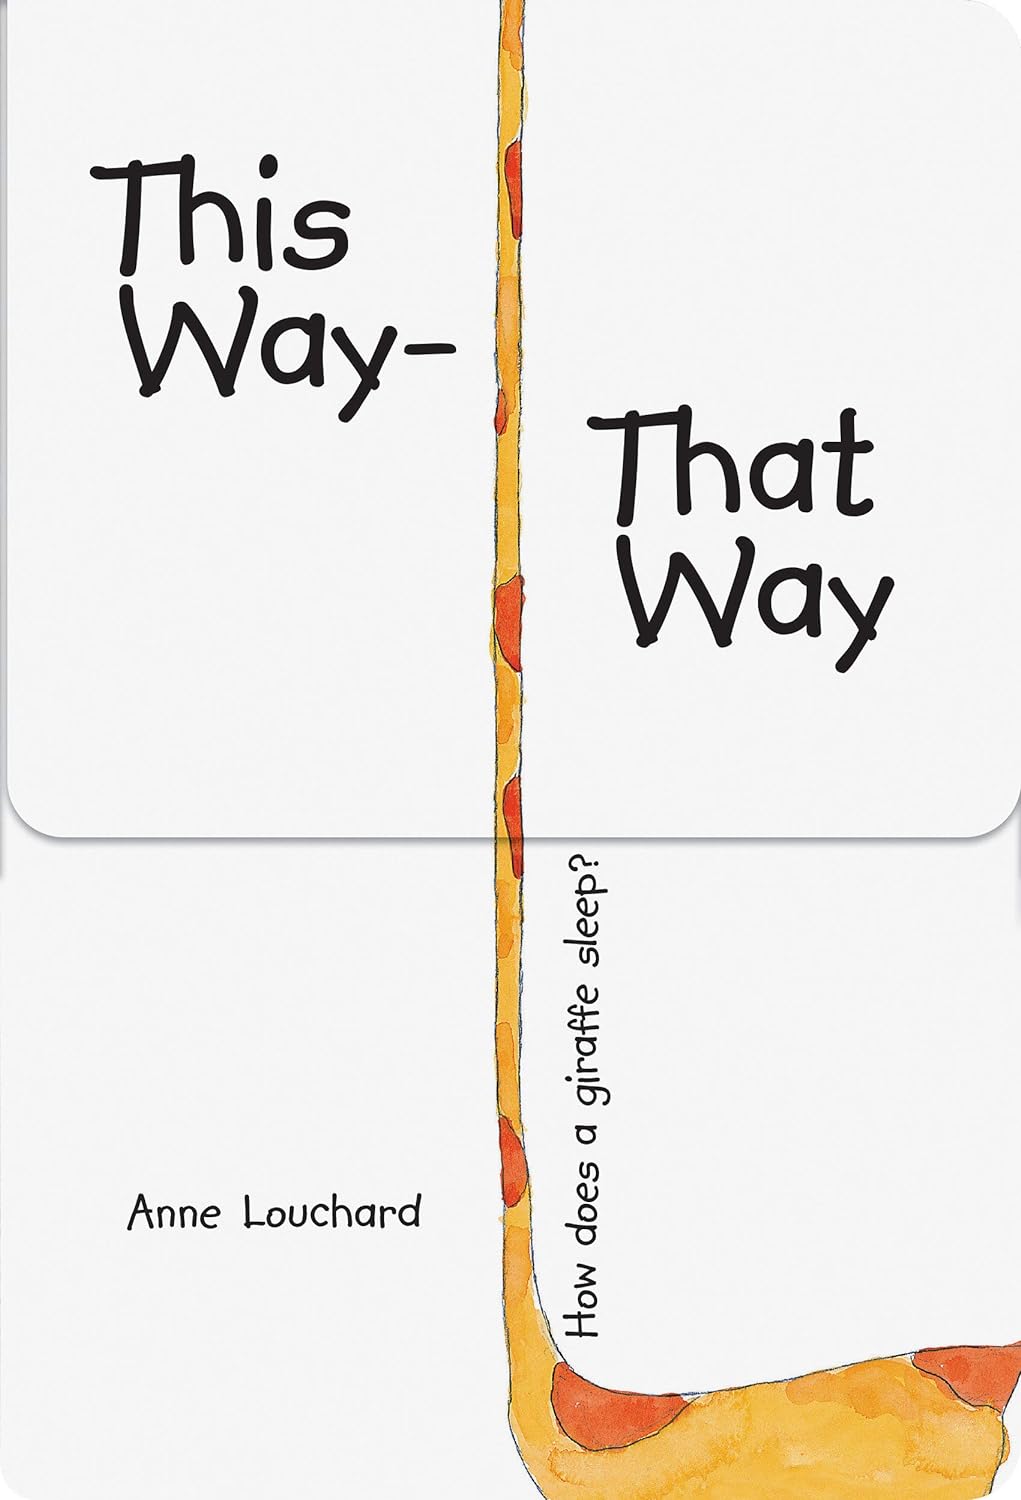 This Way- That Way Board Book